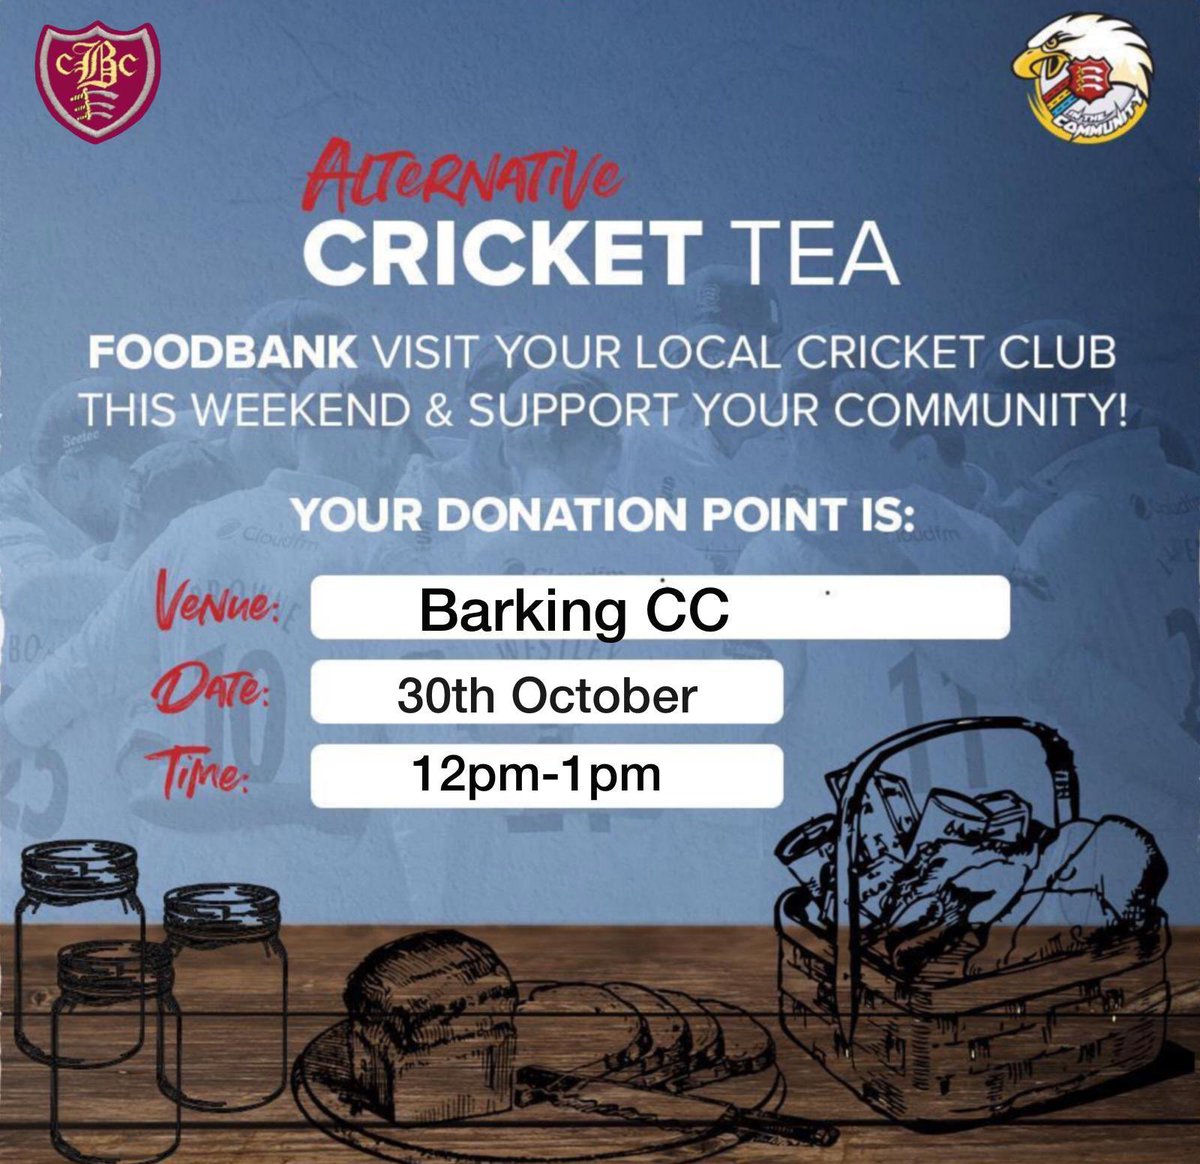 We are hosting another food bank collection at our club and it would be great if you could come along and help support our community! Whether it’s pasta, tinned food or toiletries it all helps us make a difference. #crickettea #foodbank